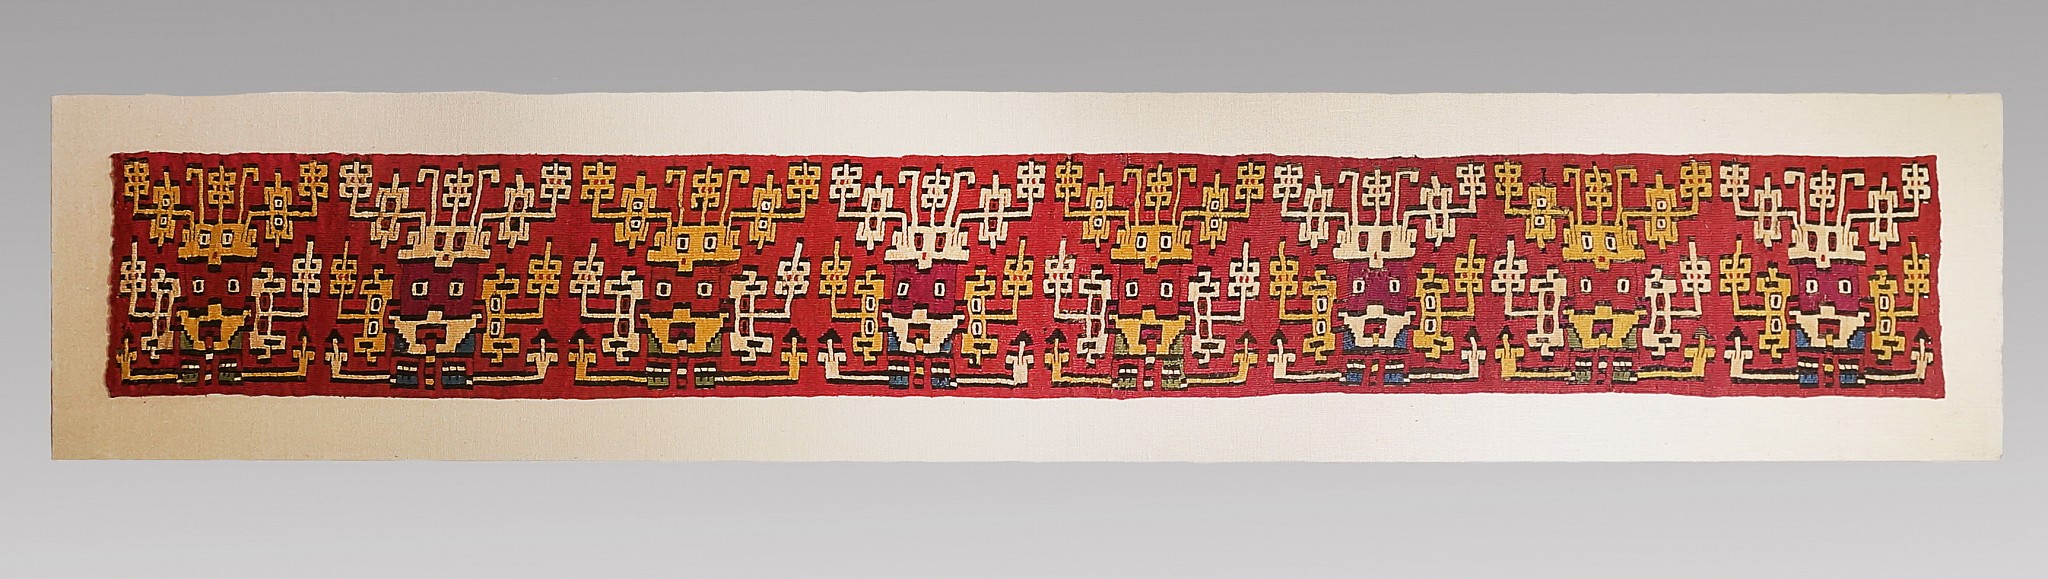 Peru, Nasca Slit Tapestry Band with 8 Faces of The Proliferous Being on Red Ground
All eight faces are in the same orientation and alternate between two color arrangements: those with burgundy faces and those with red-orange faces.  Each of the faces has a headdress with extensions, a mouth mask with extensions, and fingers holding a horizontal staff.   One of the few Nasca tunics which depicts similar face bands and is same width is illustrated in TEIDOS MILENARIOS - ANCIENT PERUVIAN TEXTILES by Jose De Lavalle, page 264-5, ISBN# 9972-717-01-1.
Media: Textile
Dimensions: Lengtht: 45 1/2" x Width 6"
Price Upon Request
M6039